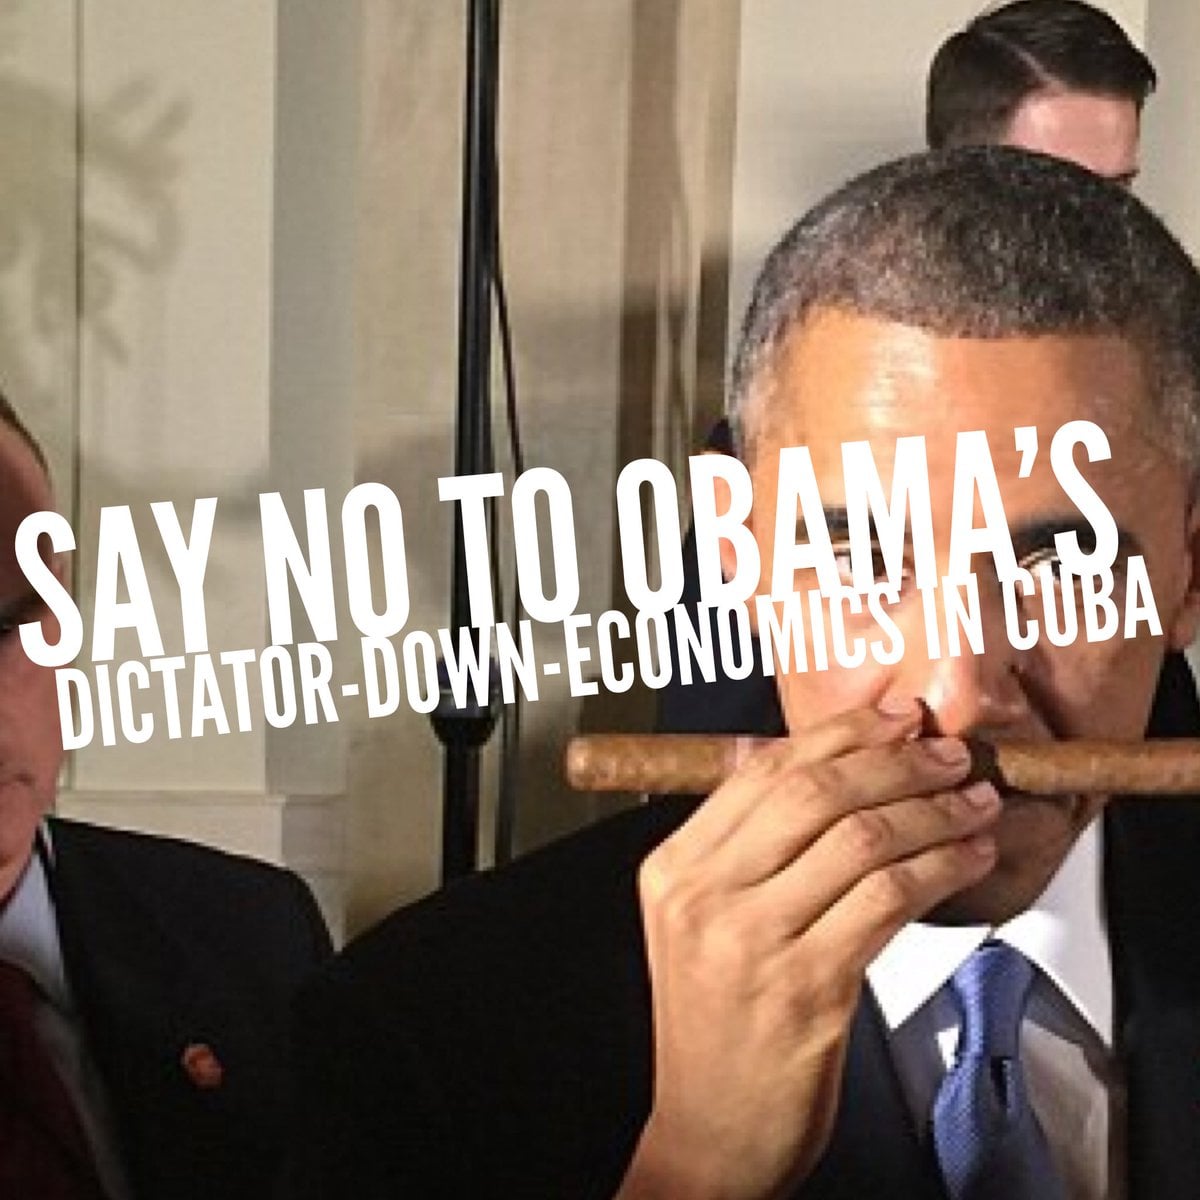 ylg-just-say-no-to-obamas-dictator-down-economics